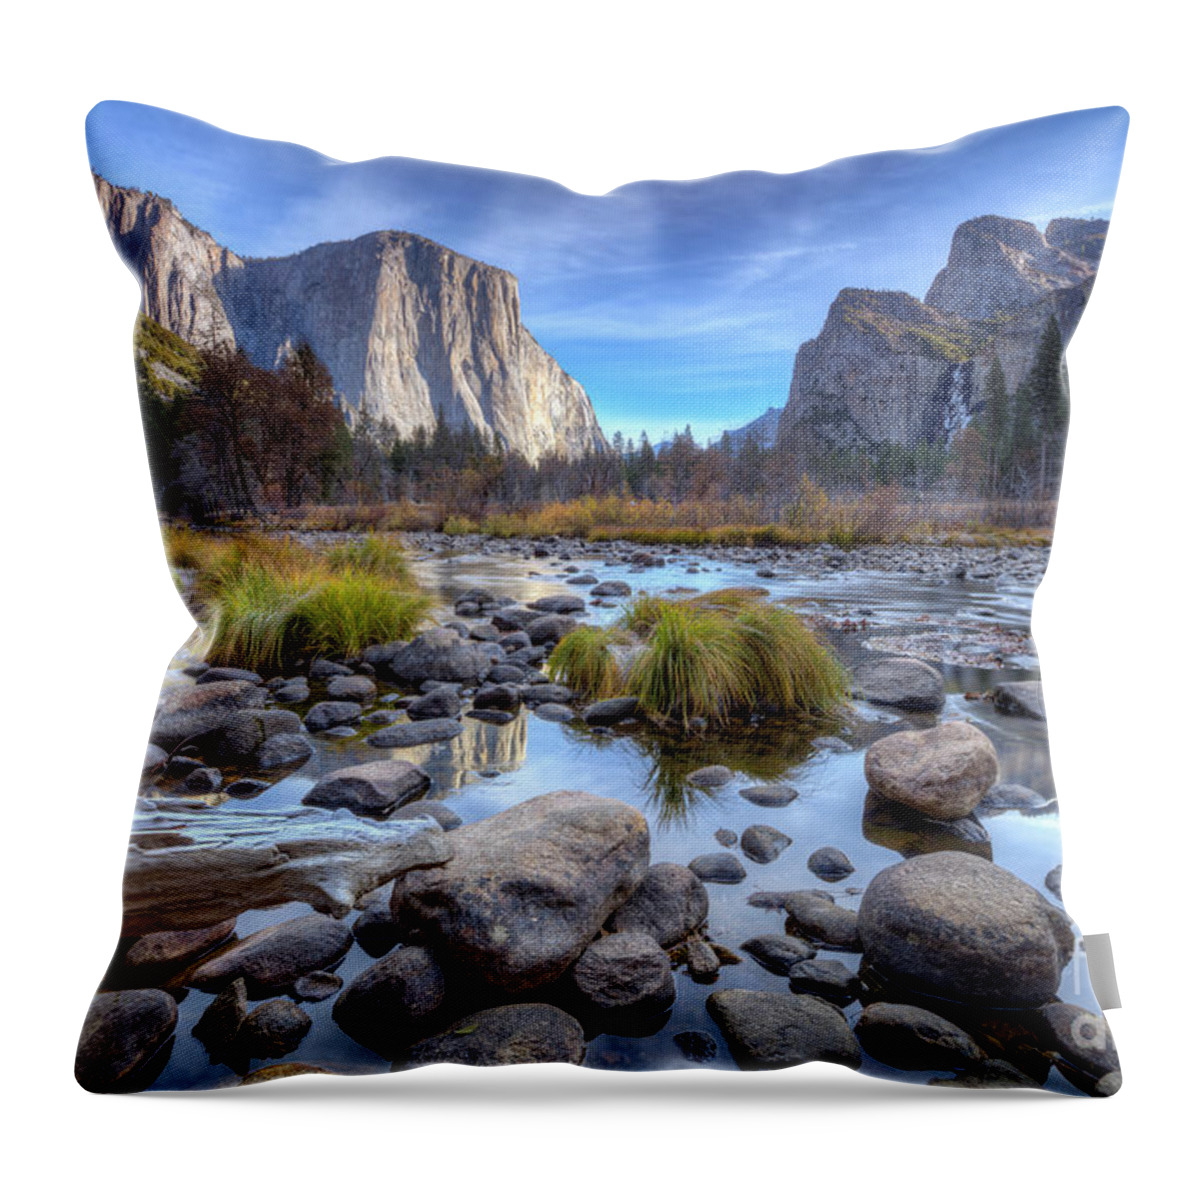 Valley View Yosemite National Park Reflections Of El Capitan In The Merced River Throw Pillow featuring the photograph Valley View Yosemite National Park Reflections of El Capitan in the Merced River by Dustin K Ryan